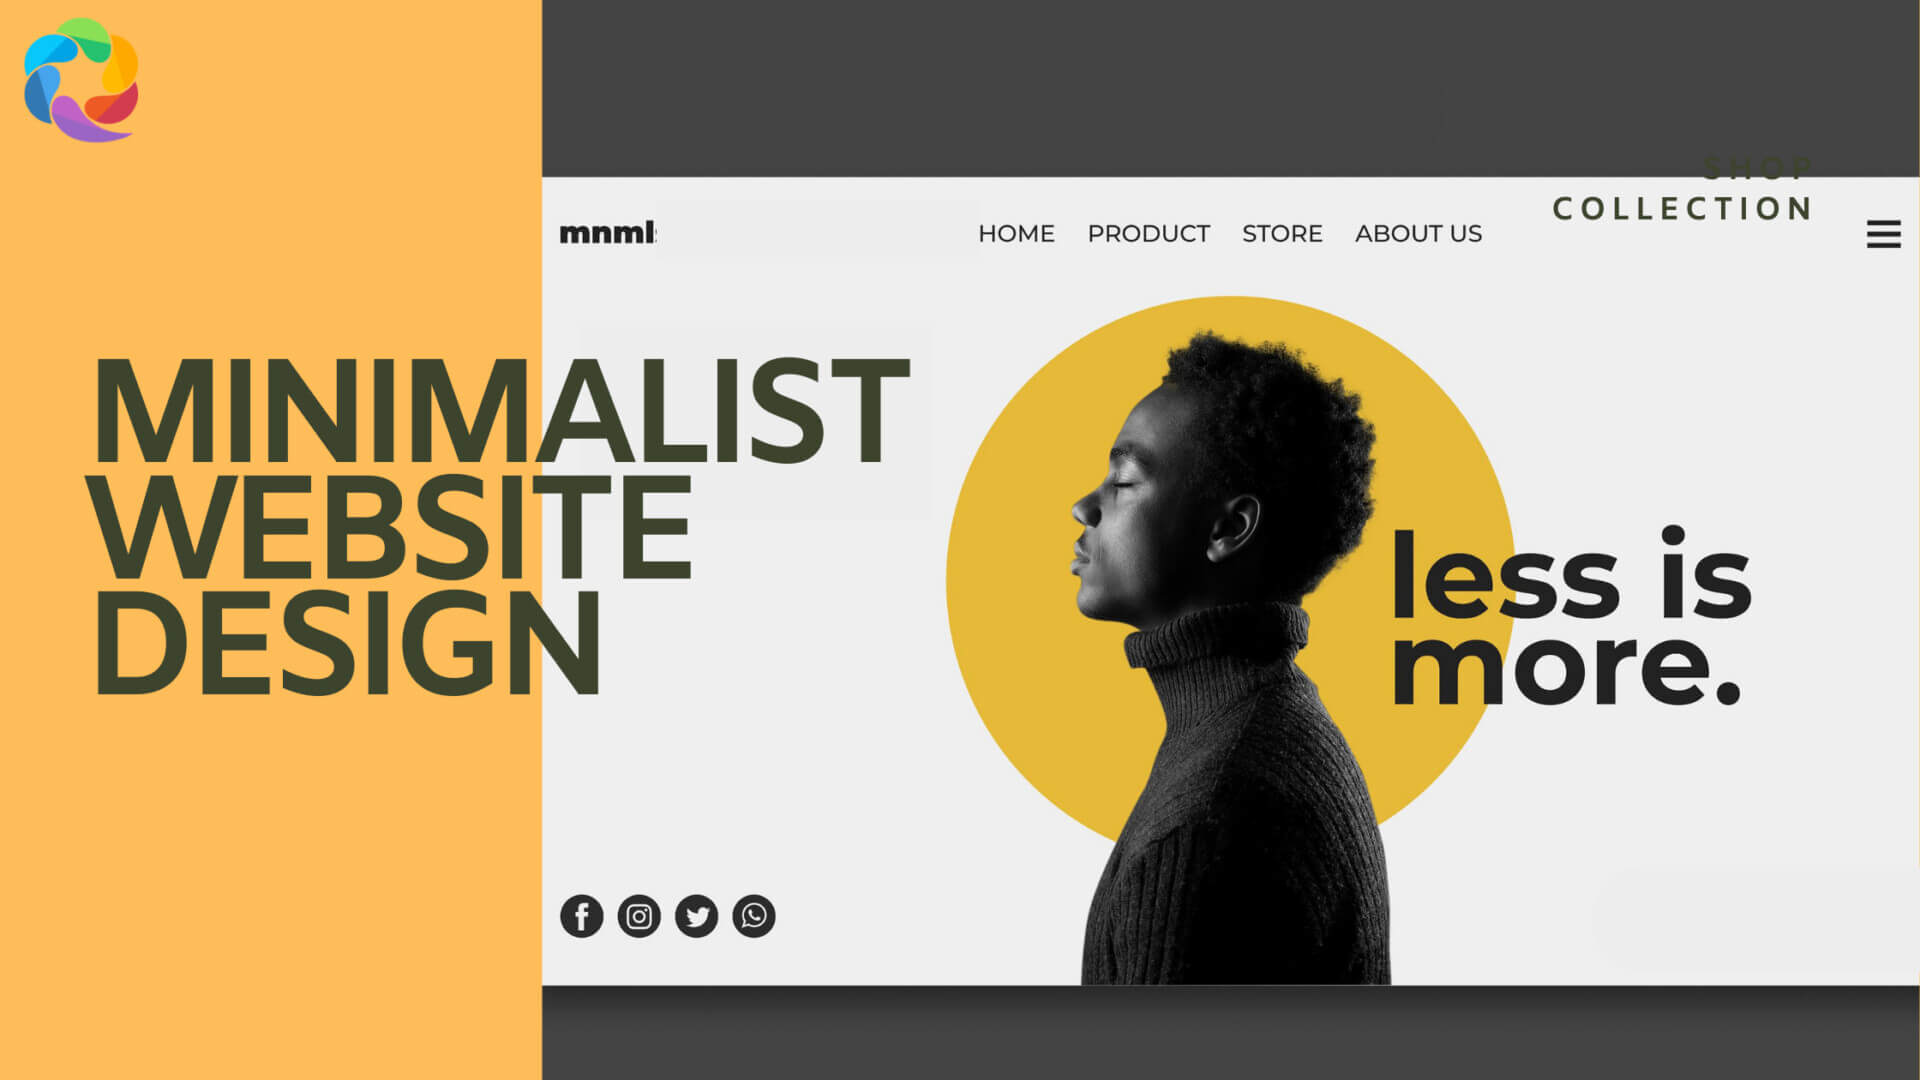 A guide to minimalist website design.